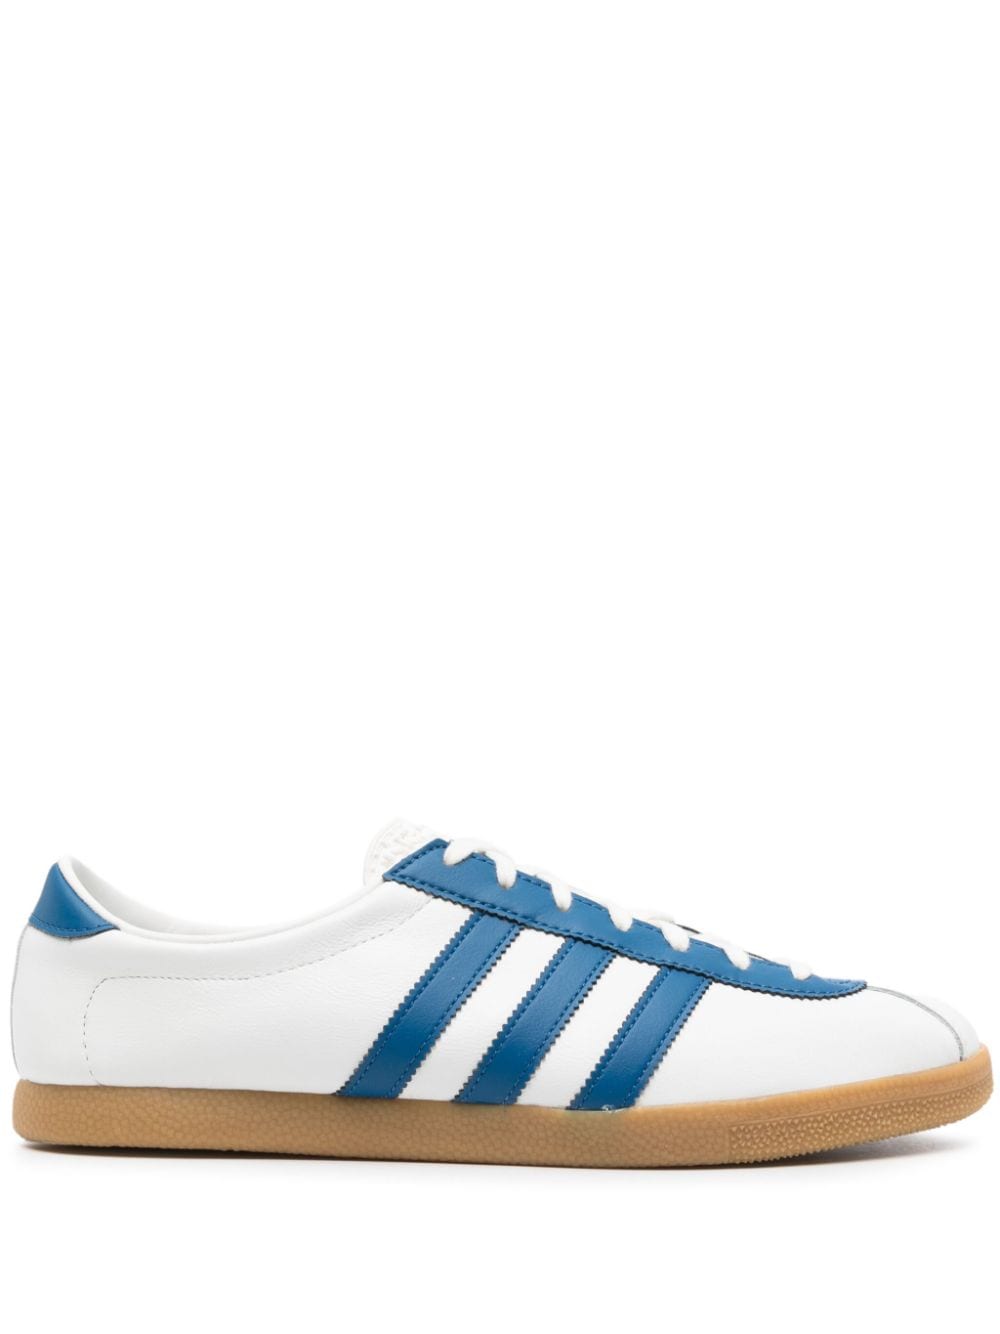 adidas London lace-up sneakers - White von adidas